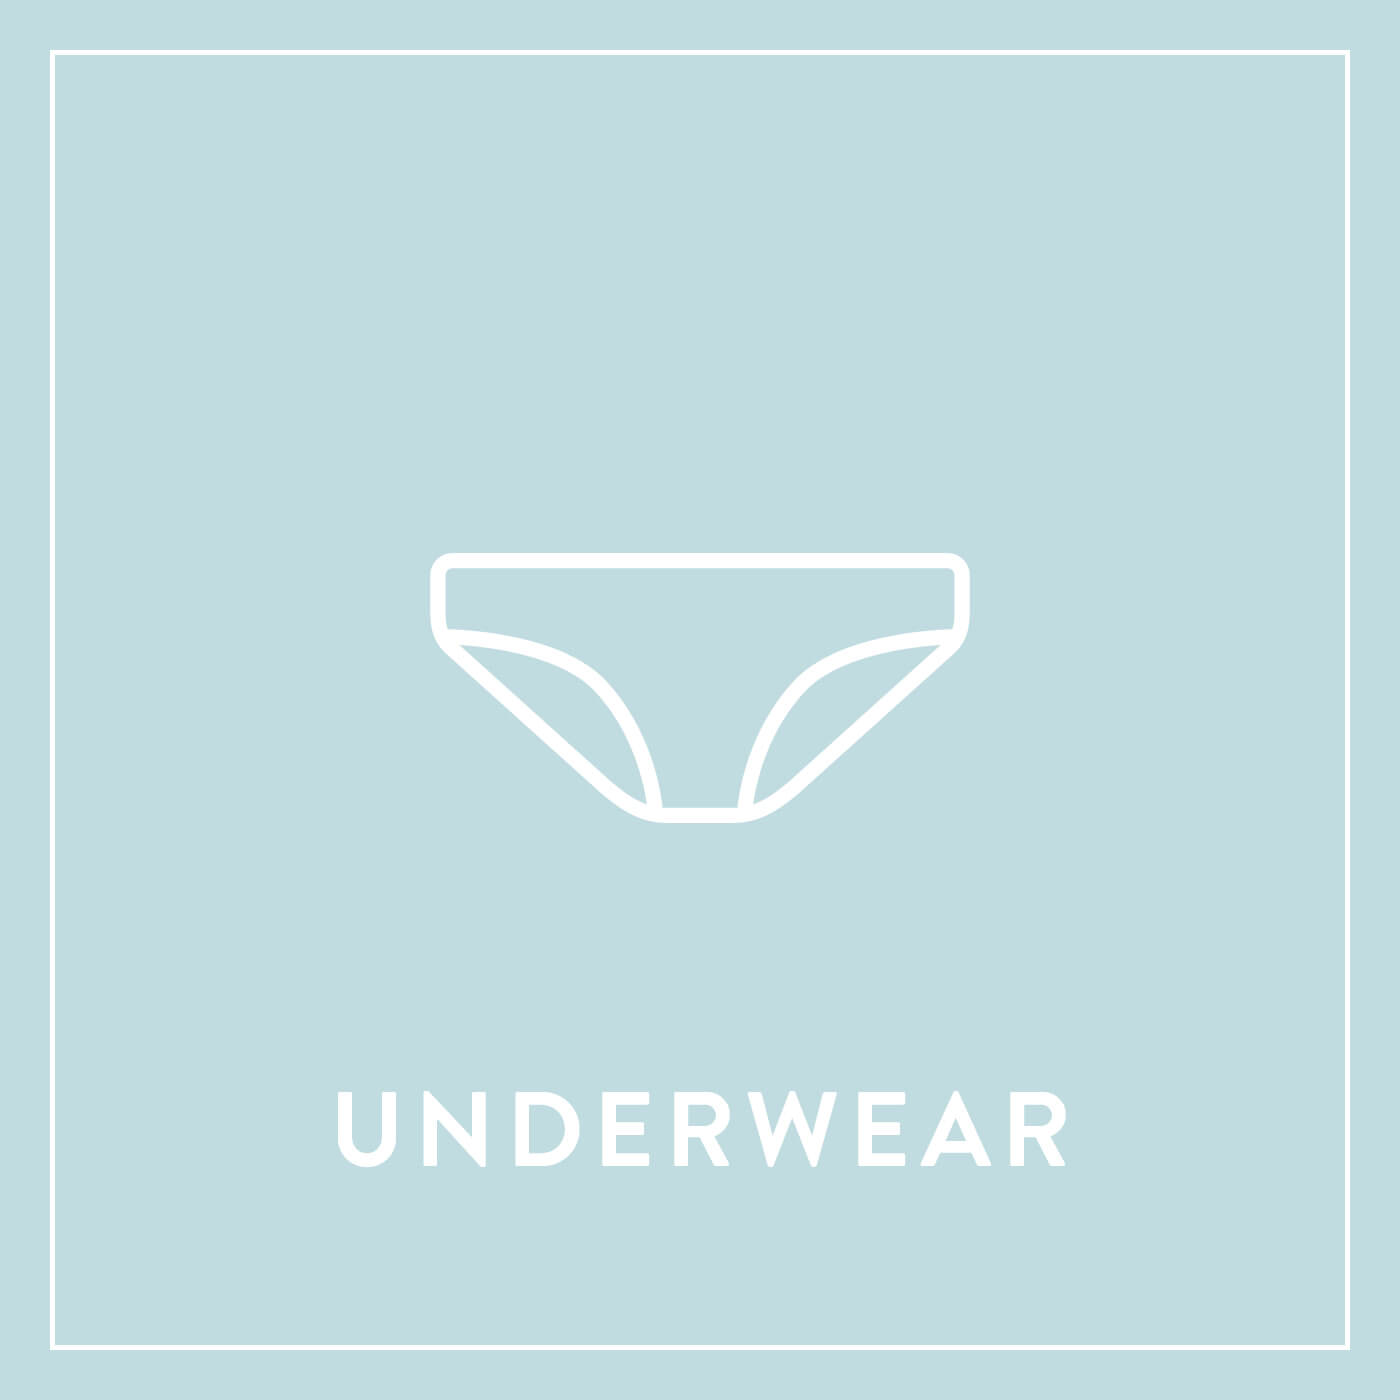 Sartorial solution  What are the proper undergarments for summer